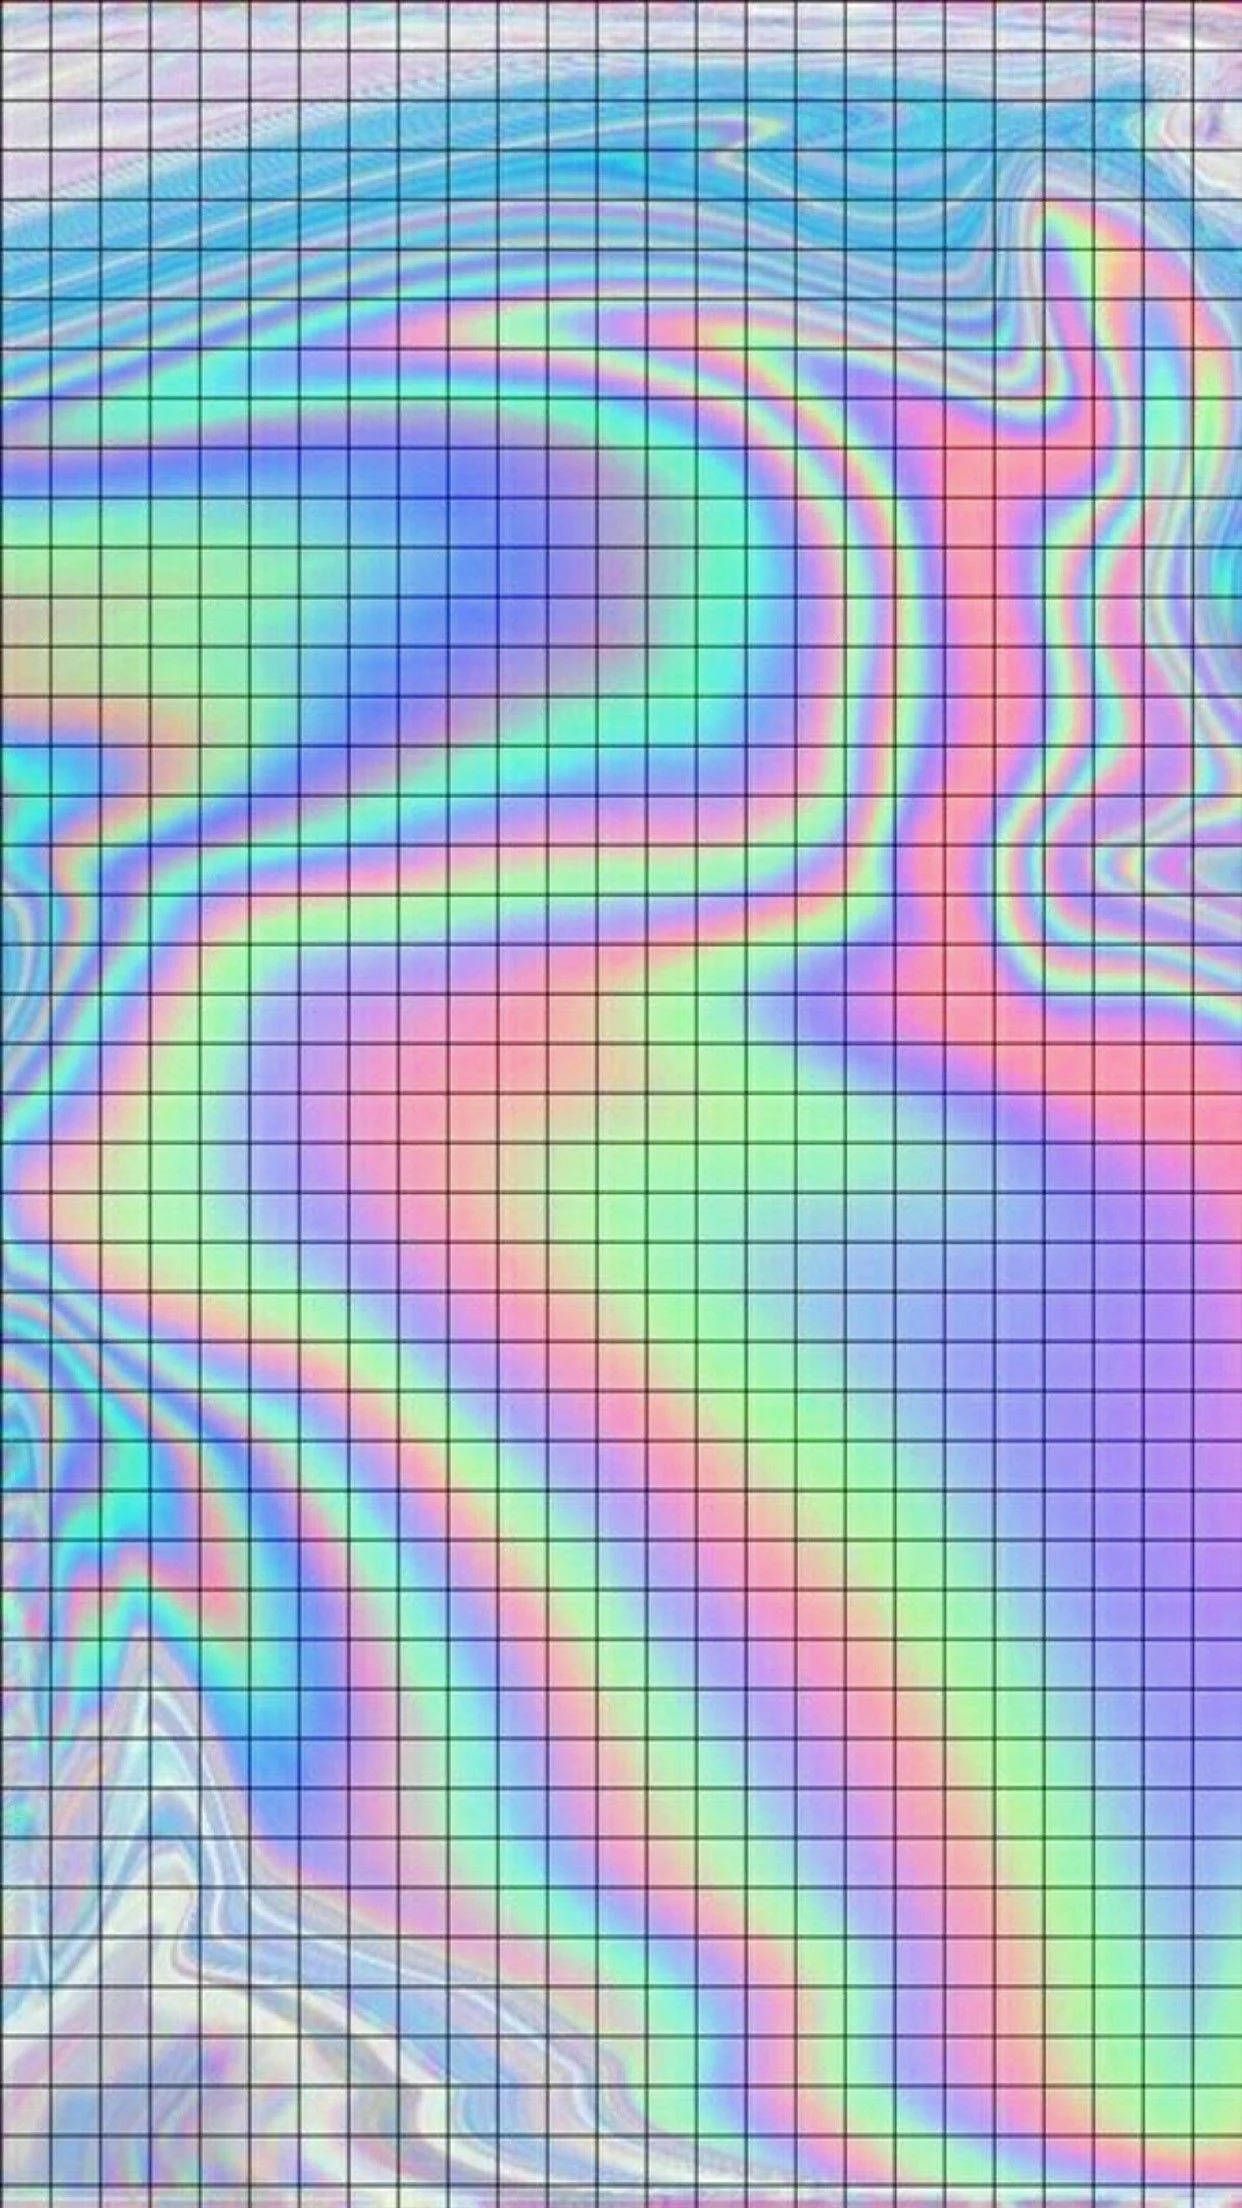 A colorful grid pattern with rainbow colors - Grid